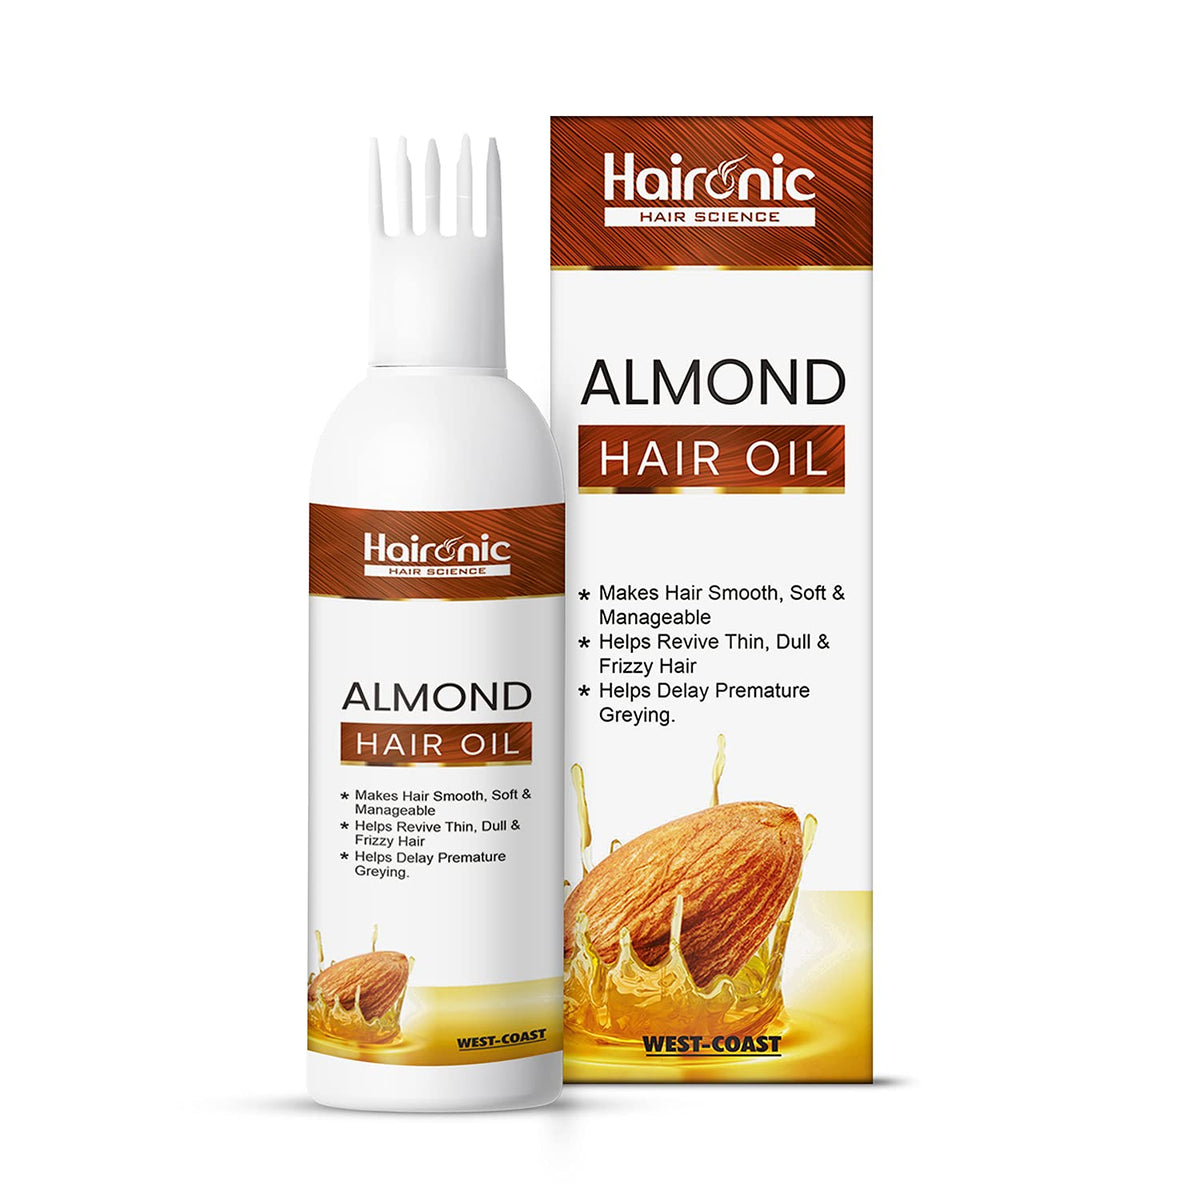 Haironic Hair Science Almond Hair Oil | Makes Hair Smooth, Soft & Manageable, Helps Revive Thin, Dull & Frizzy Hair | Suitable For All Hair Types - 100ml (Pack of 3)